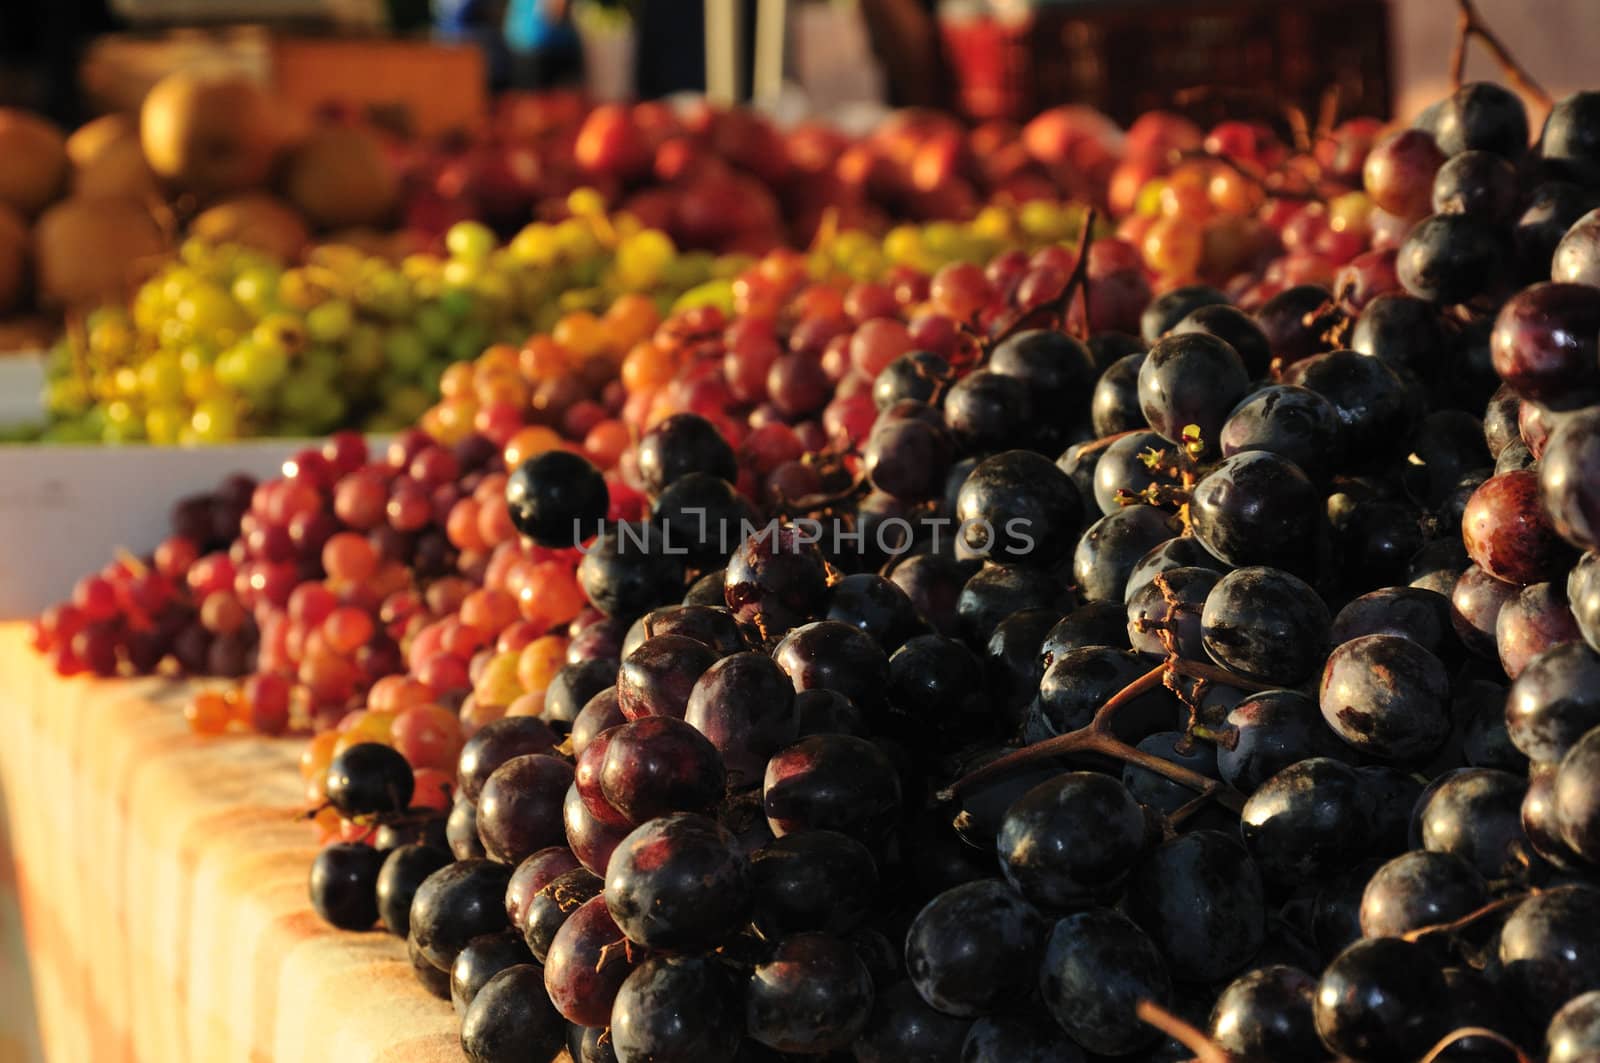 Black, red, and green grapes at a farmer's market